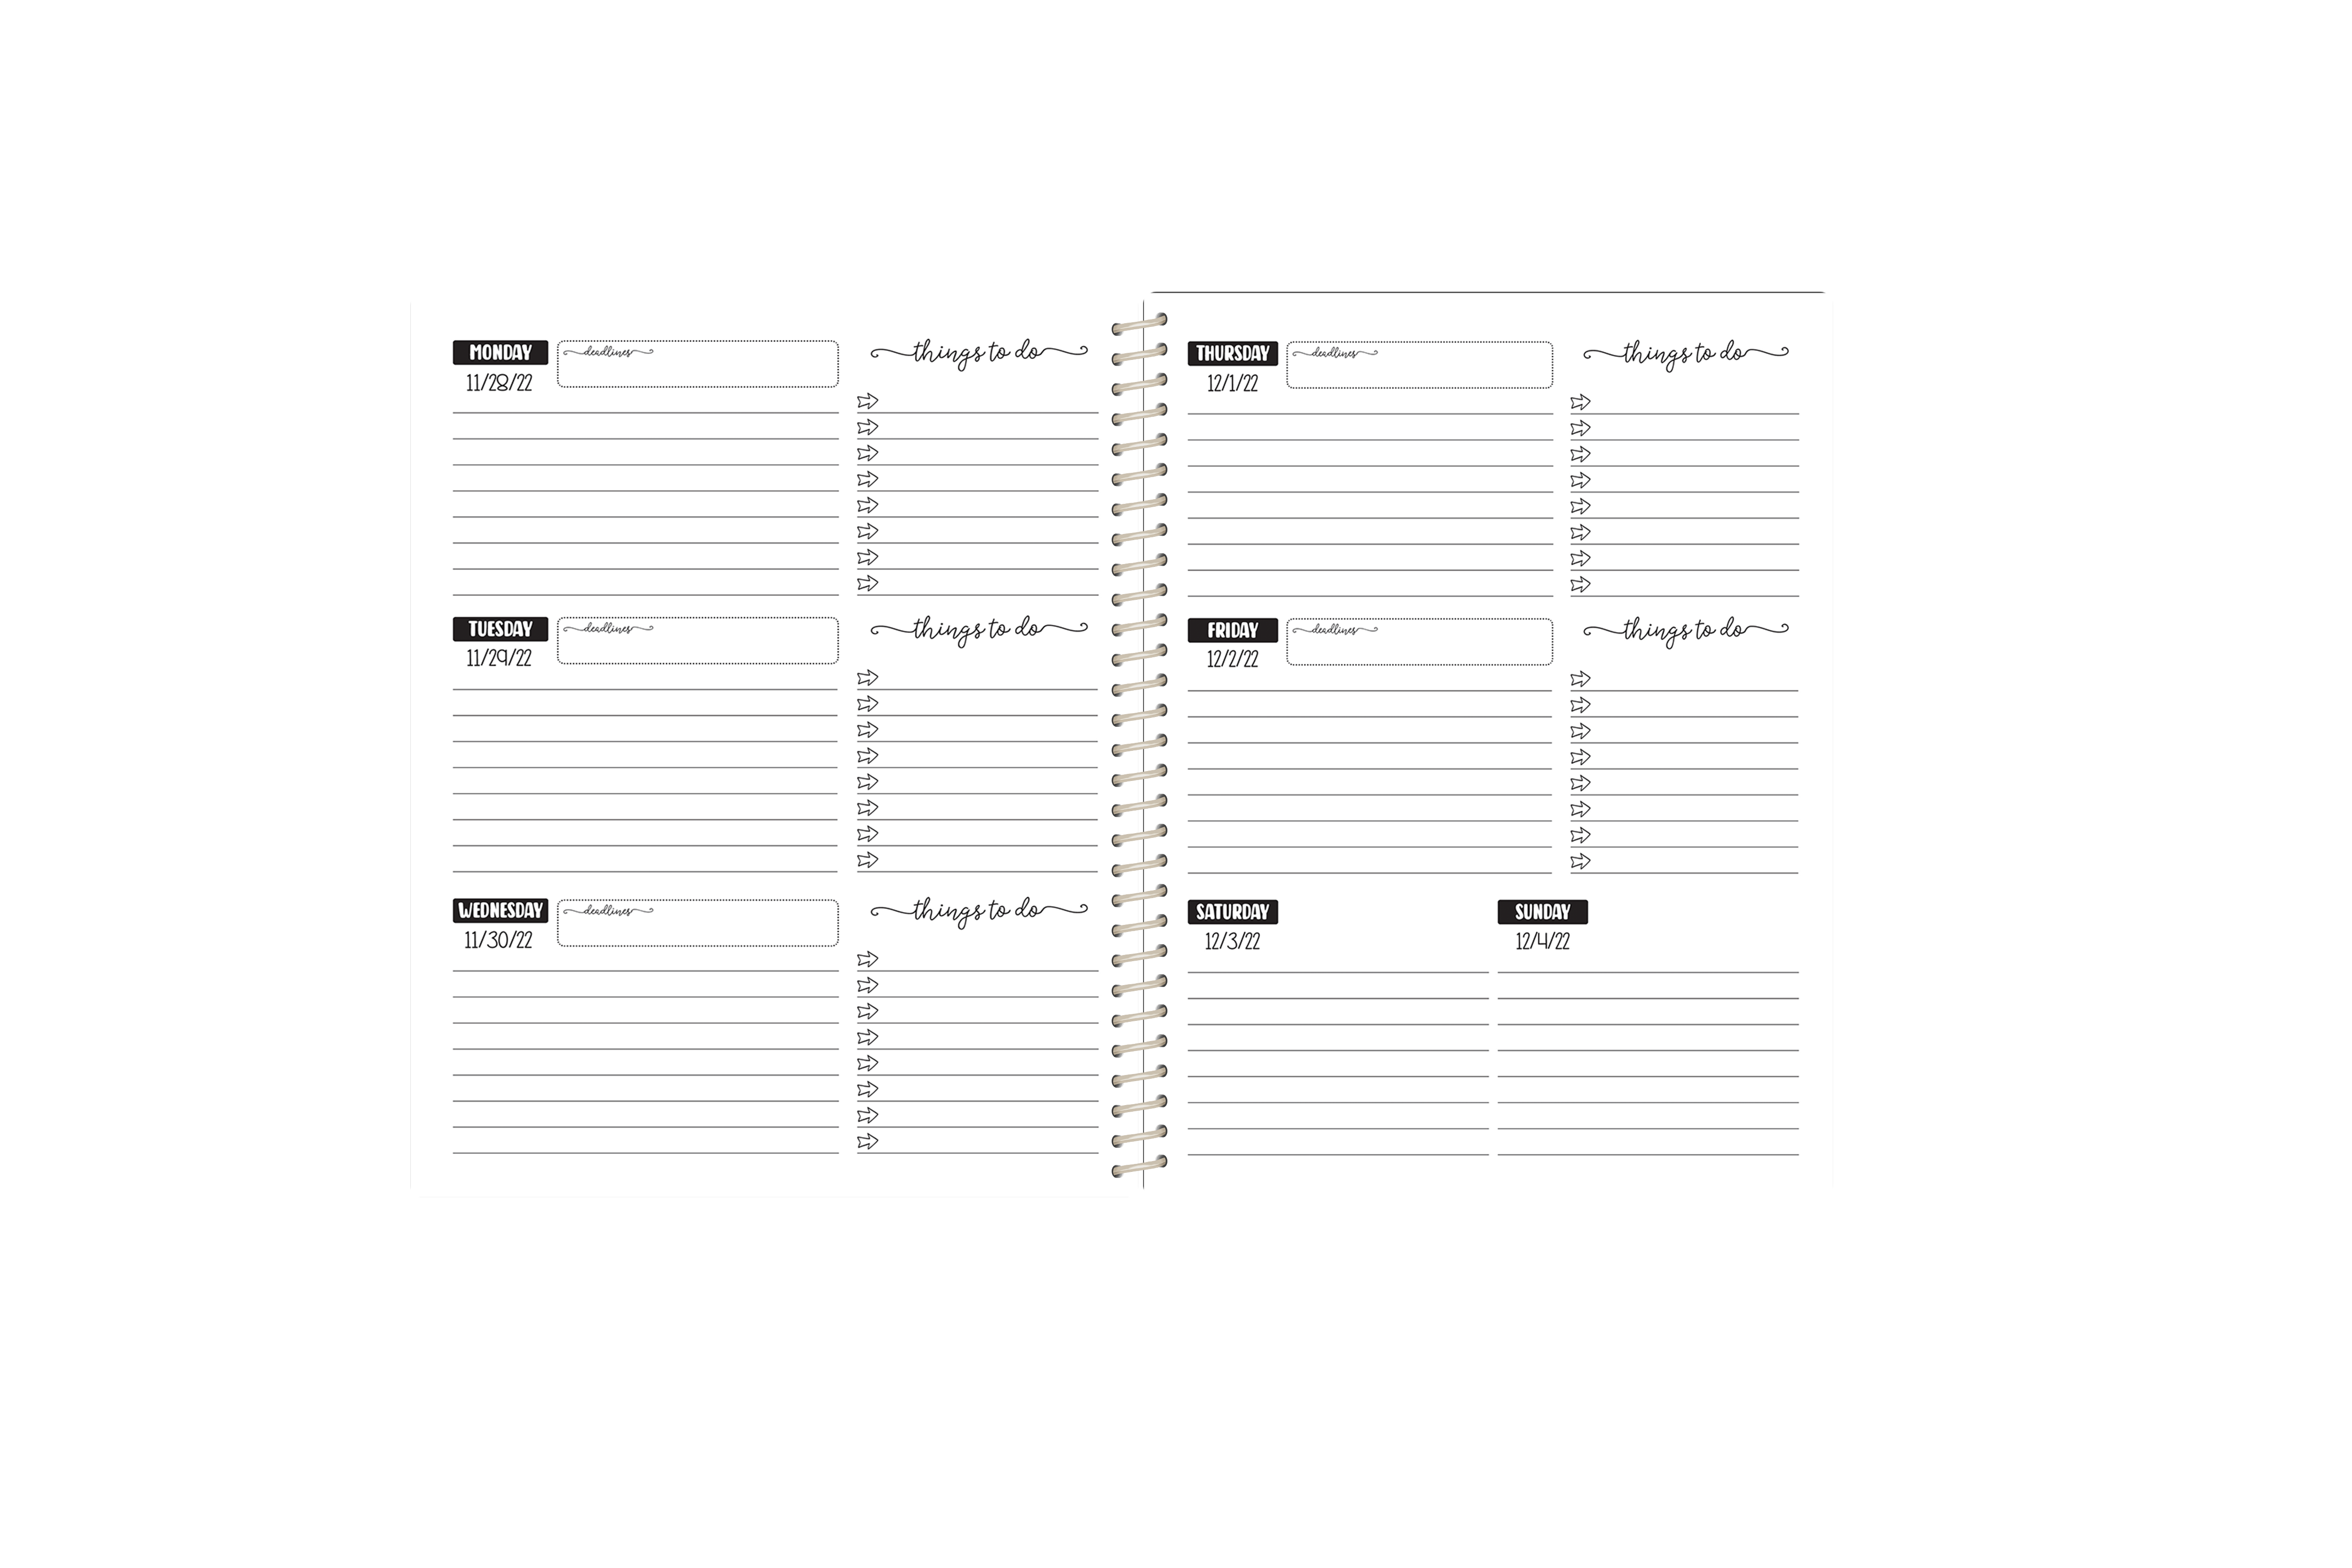 CUSTOM WEEKLY PLANNER - Choose your own background